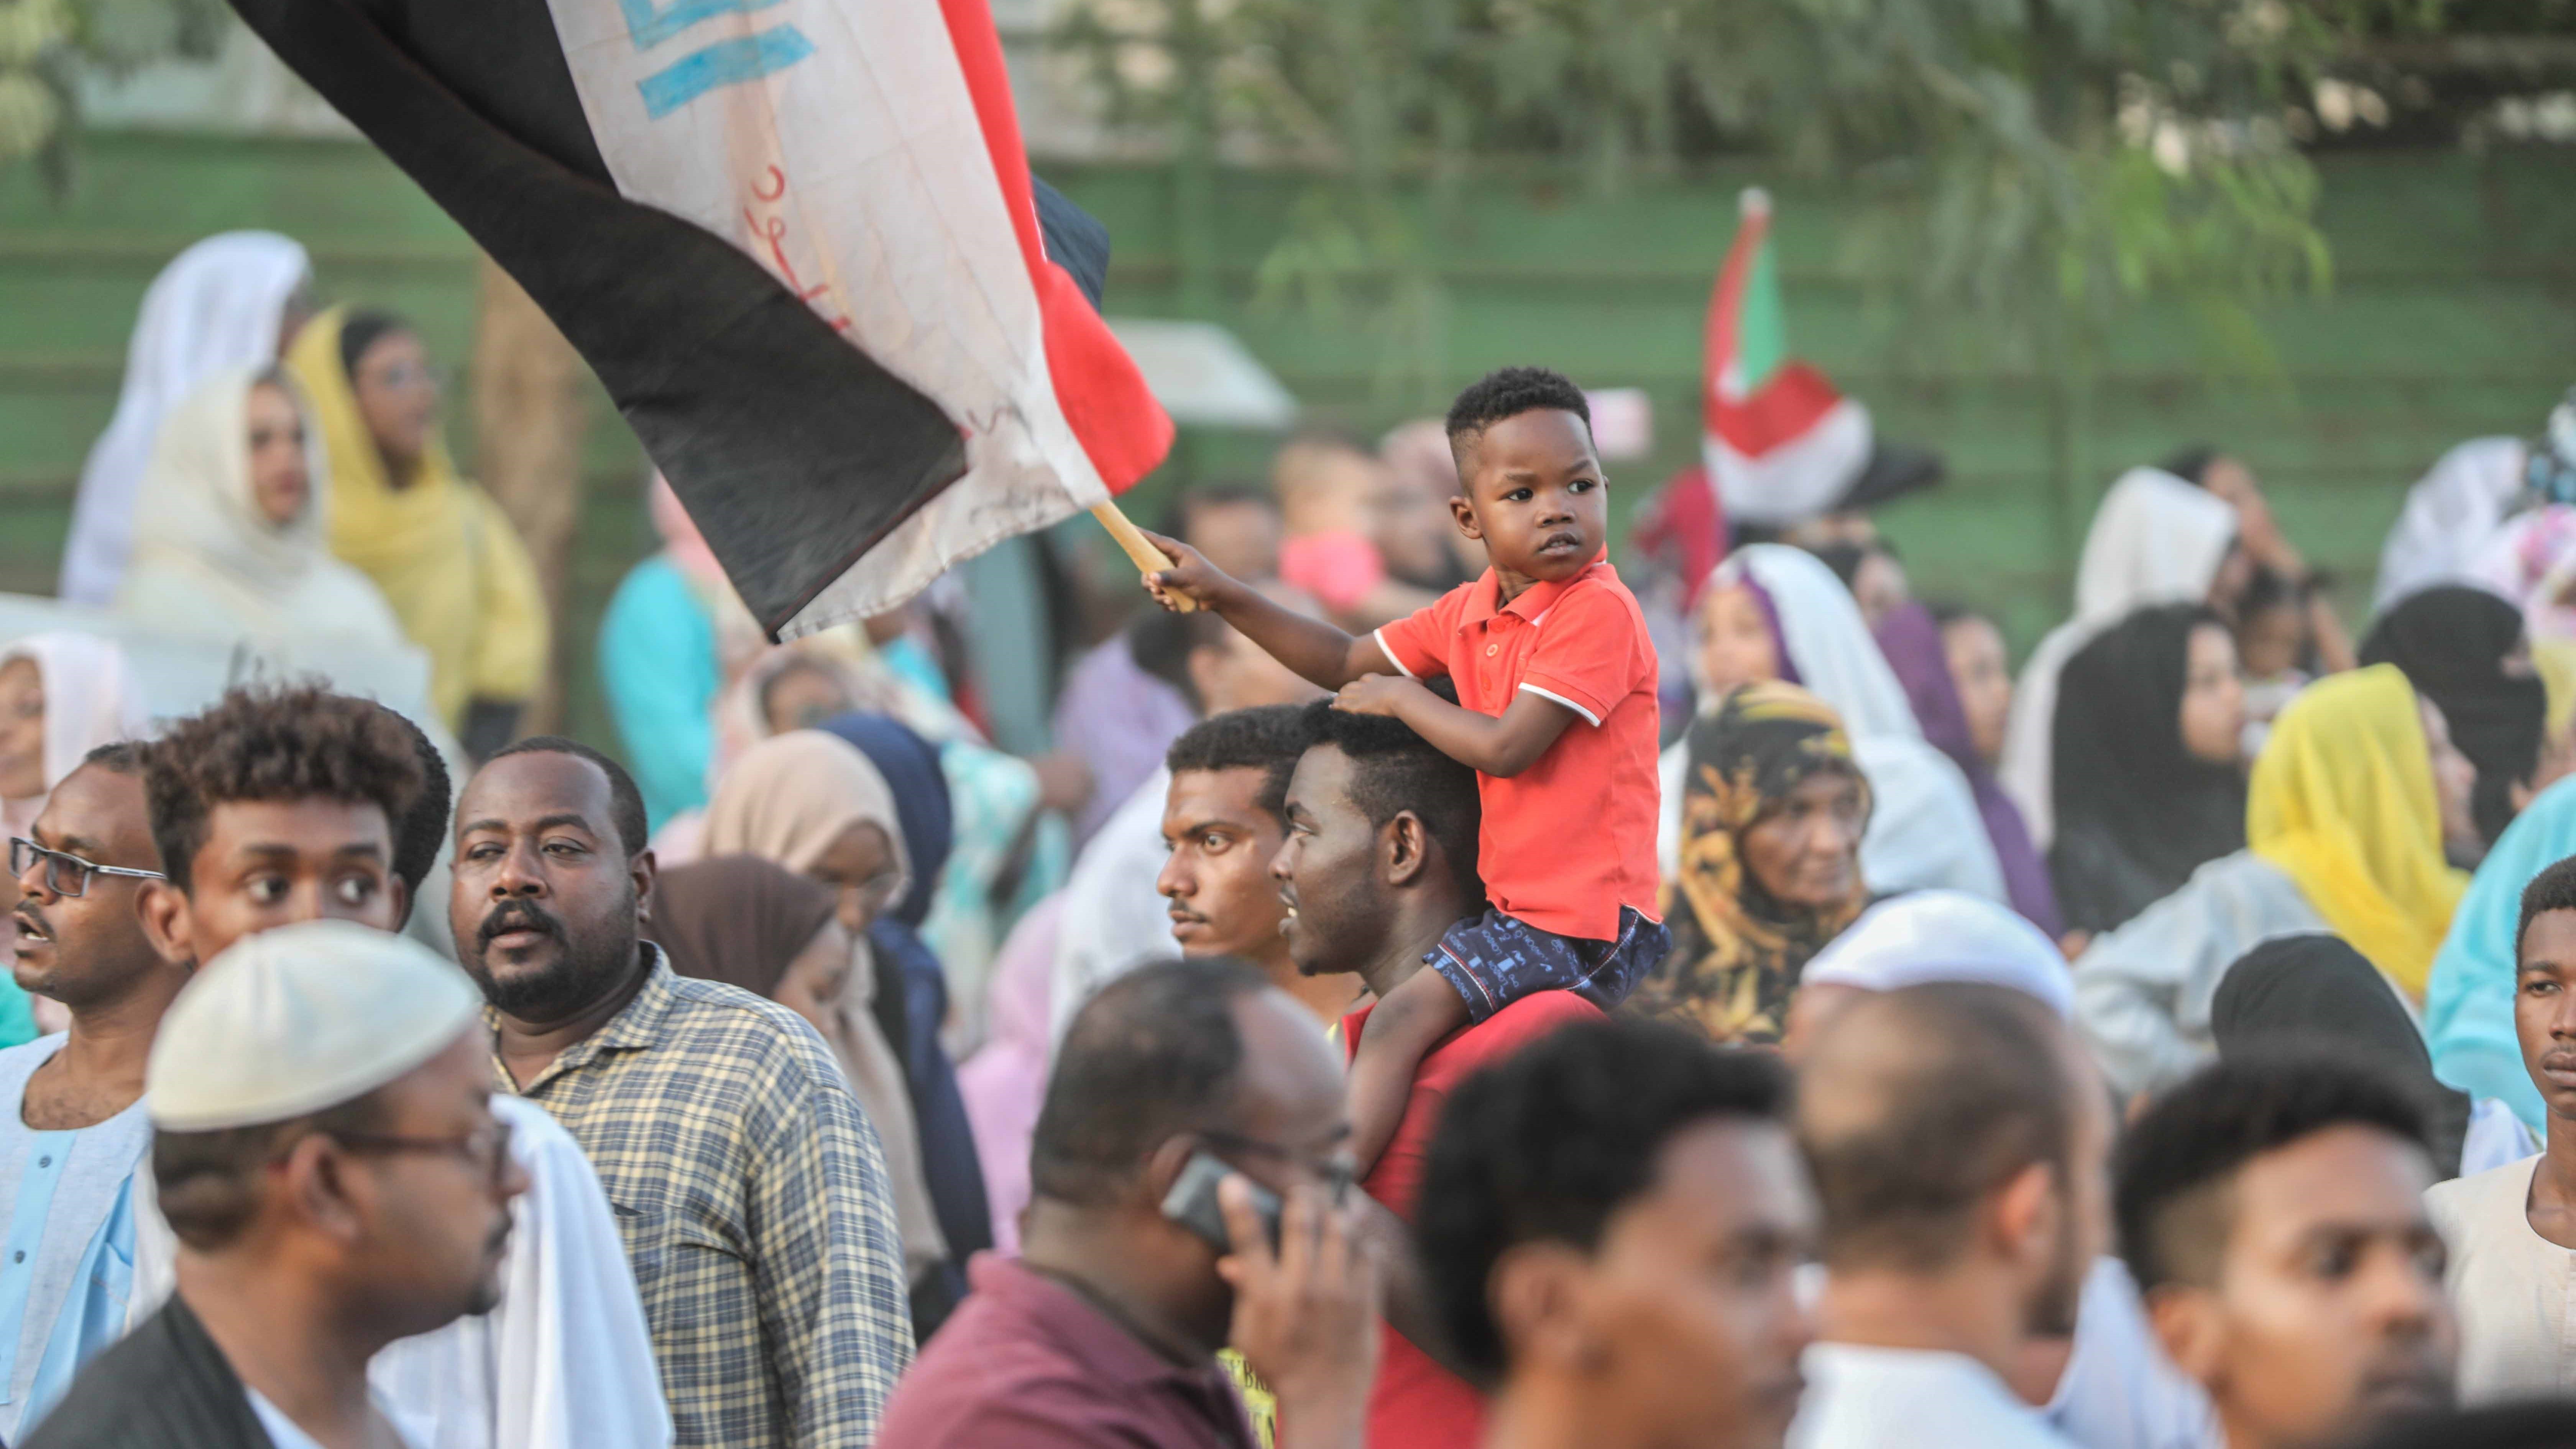 Mediator Brings Sudan’s Sides Together – Though it Could Be a Bit Early to Celebrate